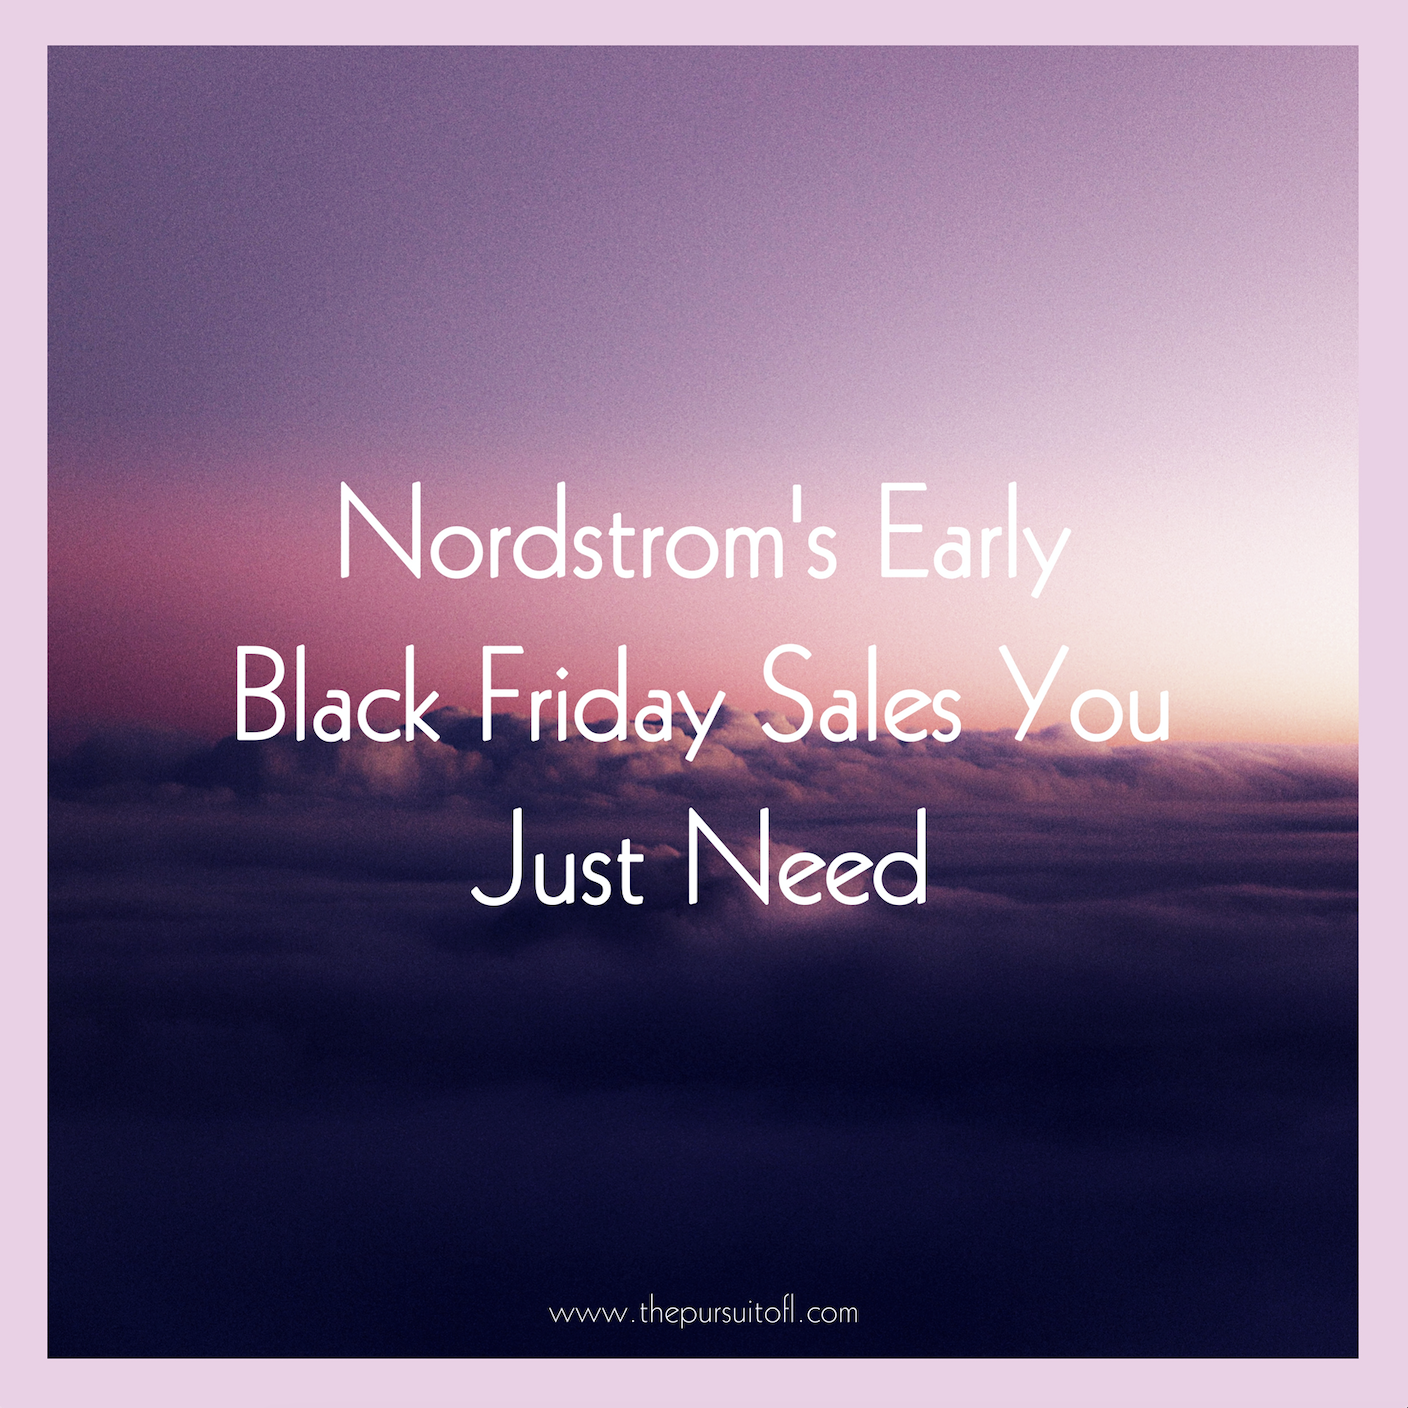 Nordstrom's Early Black Friday Sales You Just Need